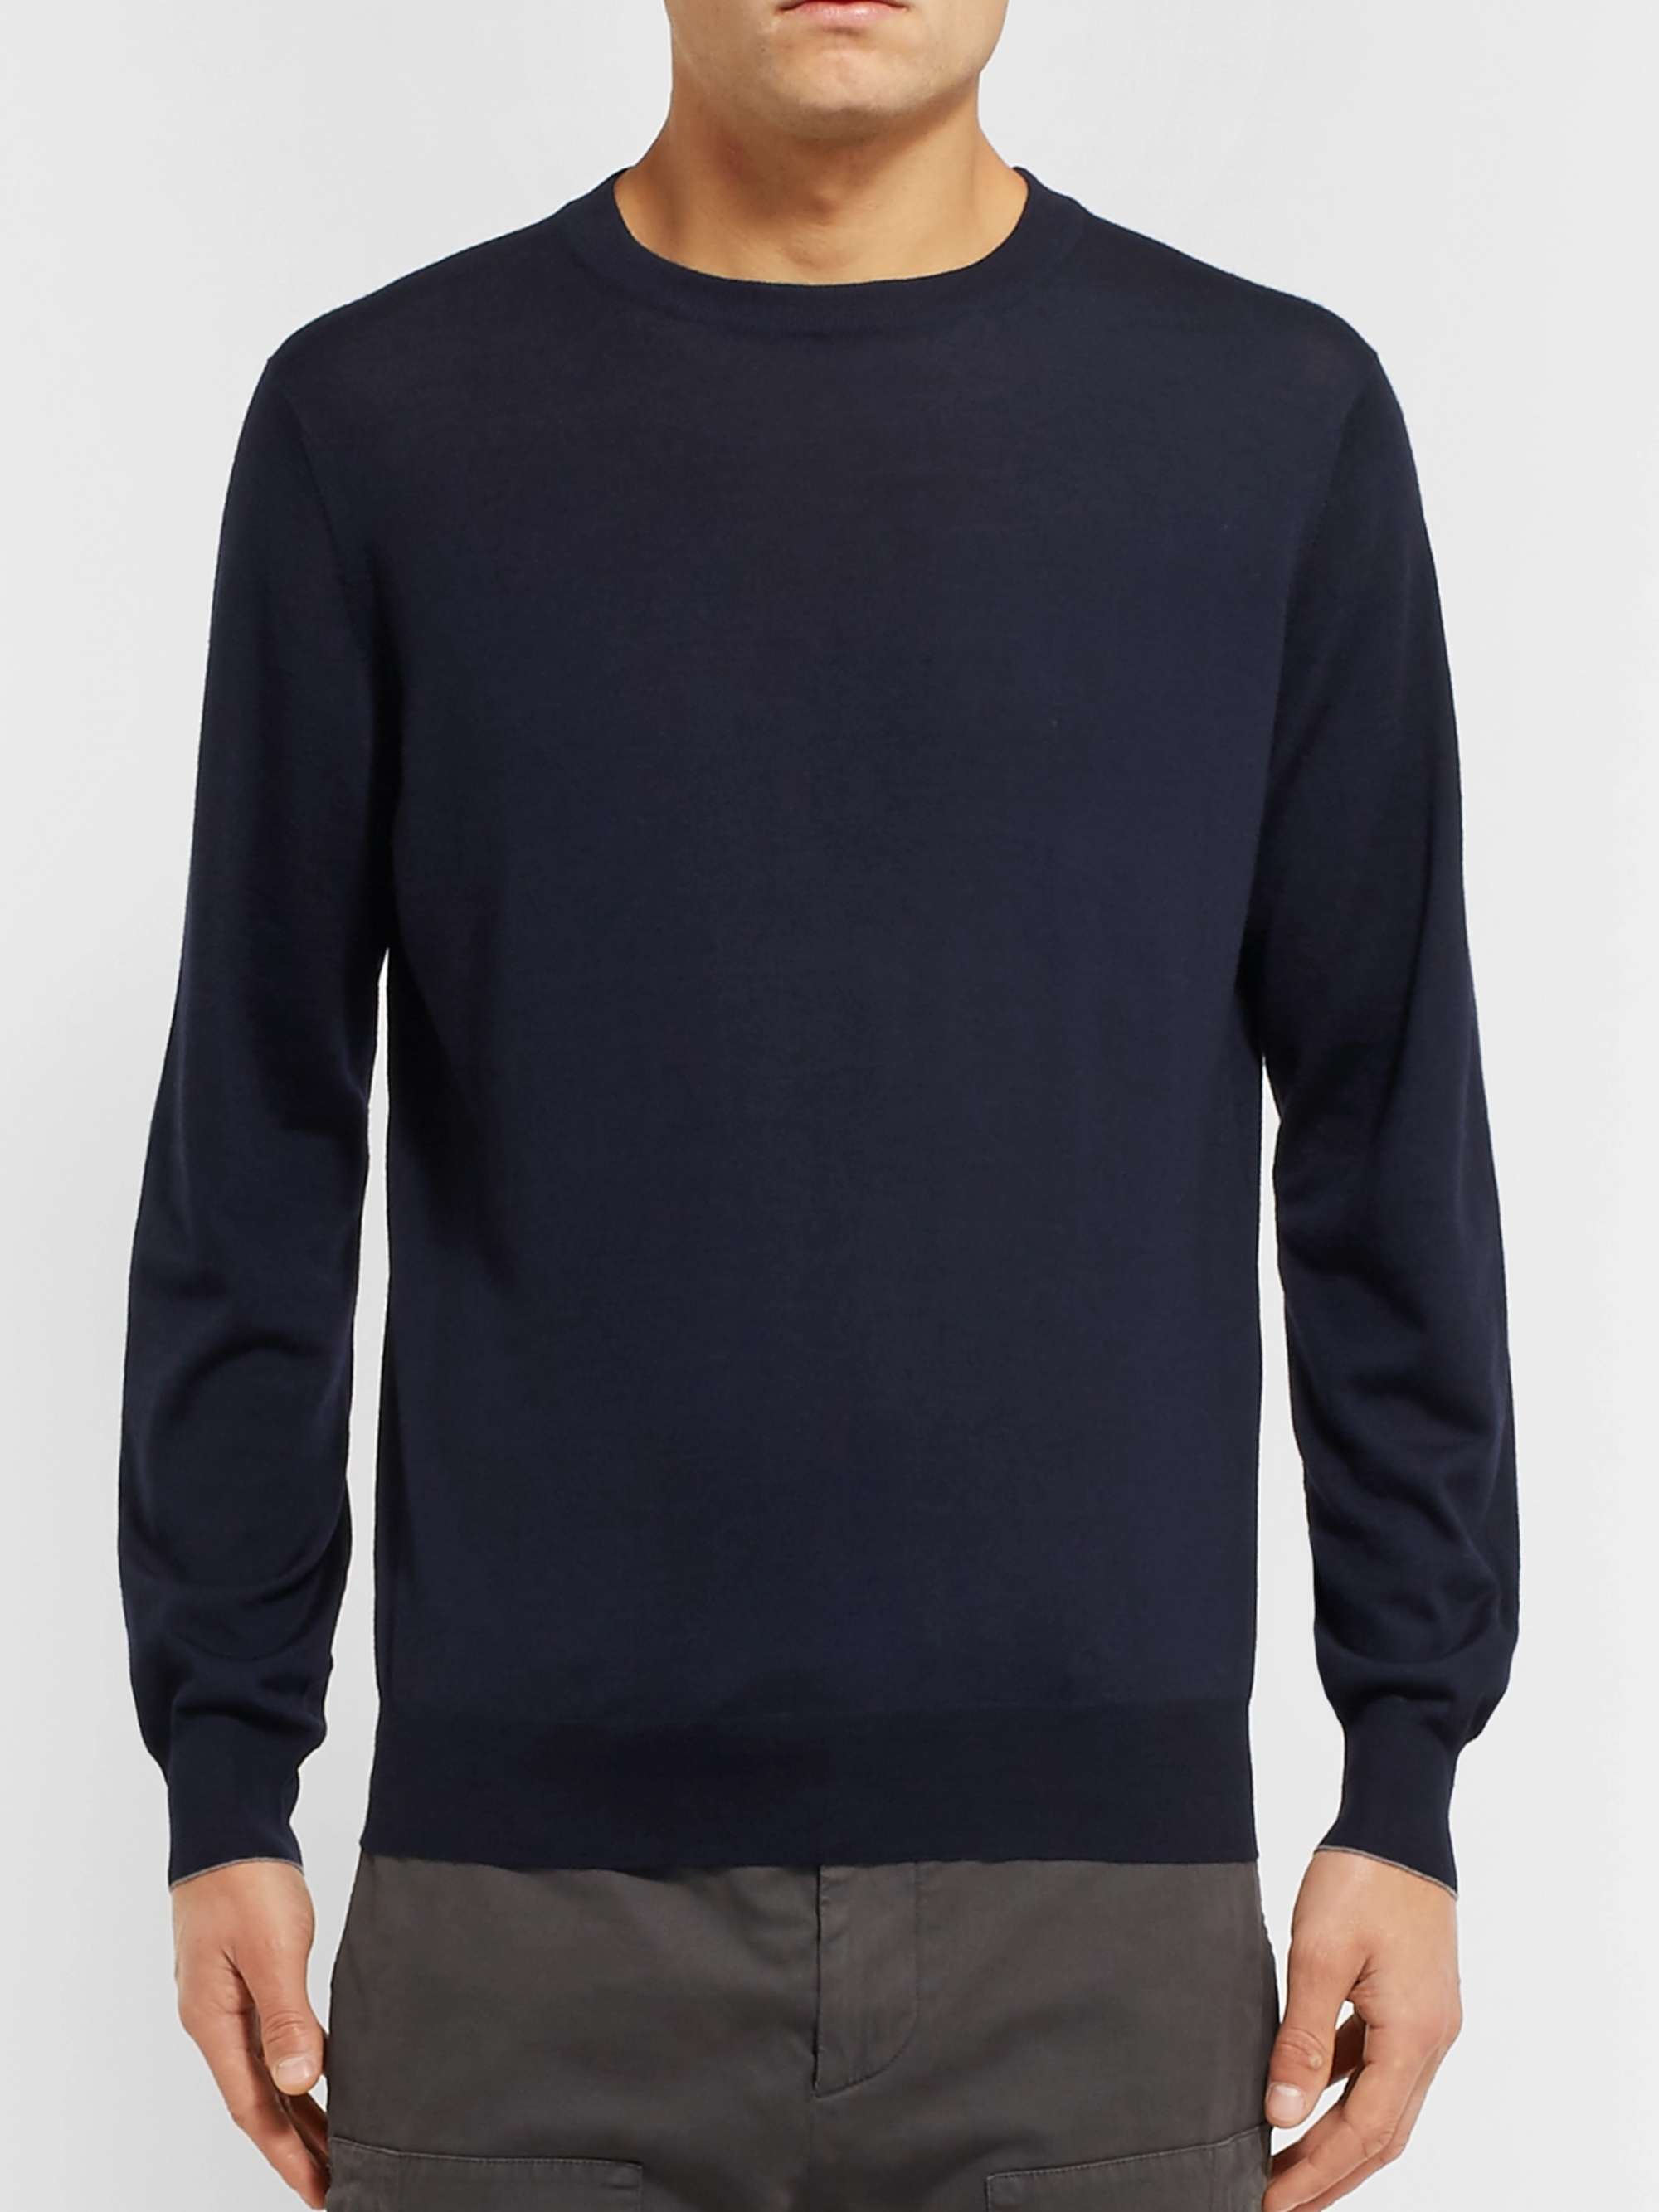 BRUNELLO CUCINELLI Wool and Cashmere-Blend Sweater